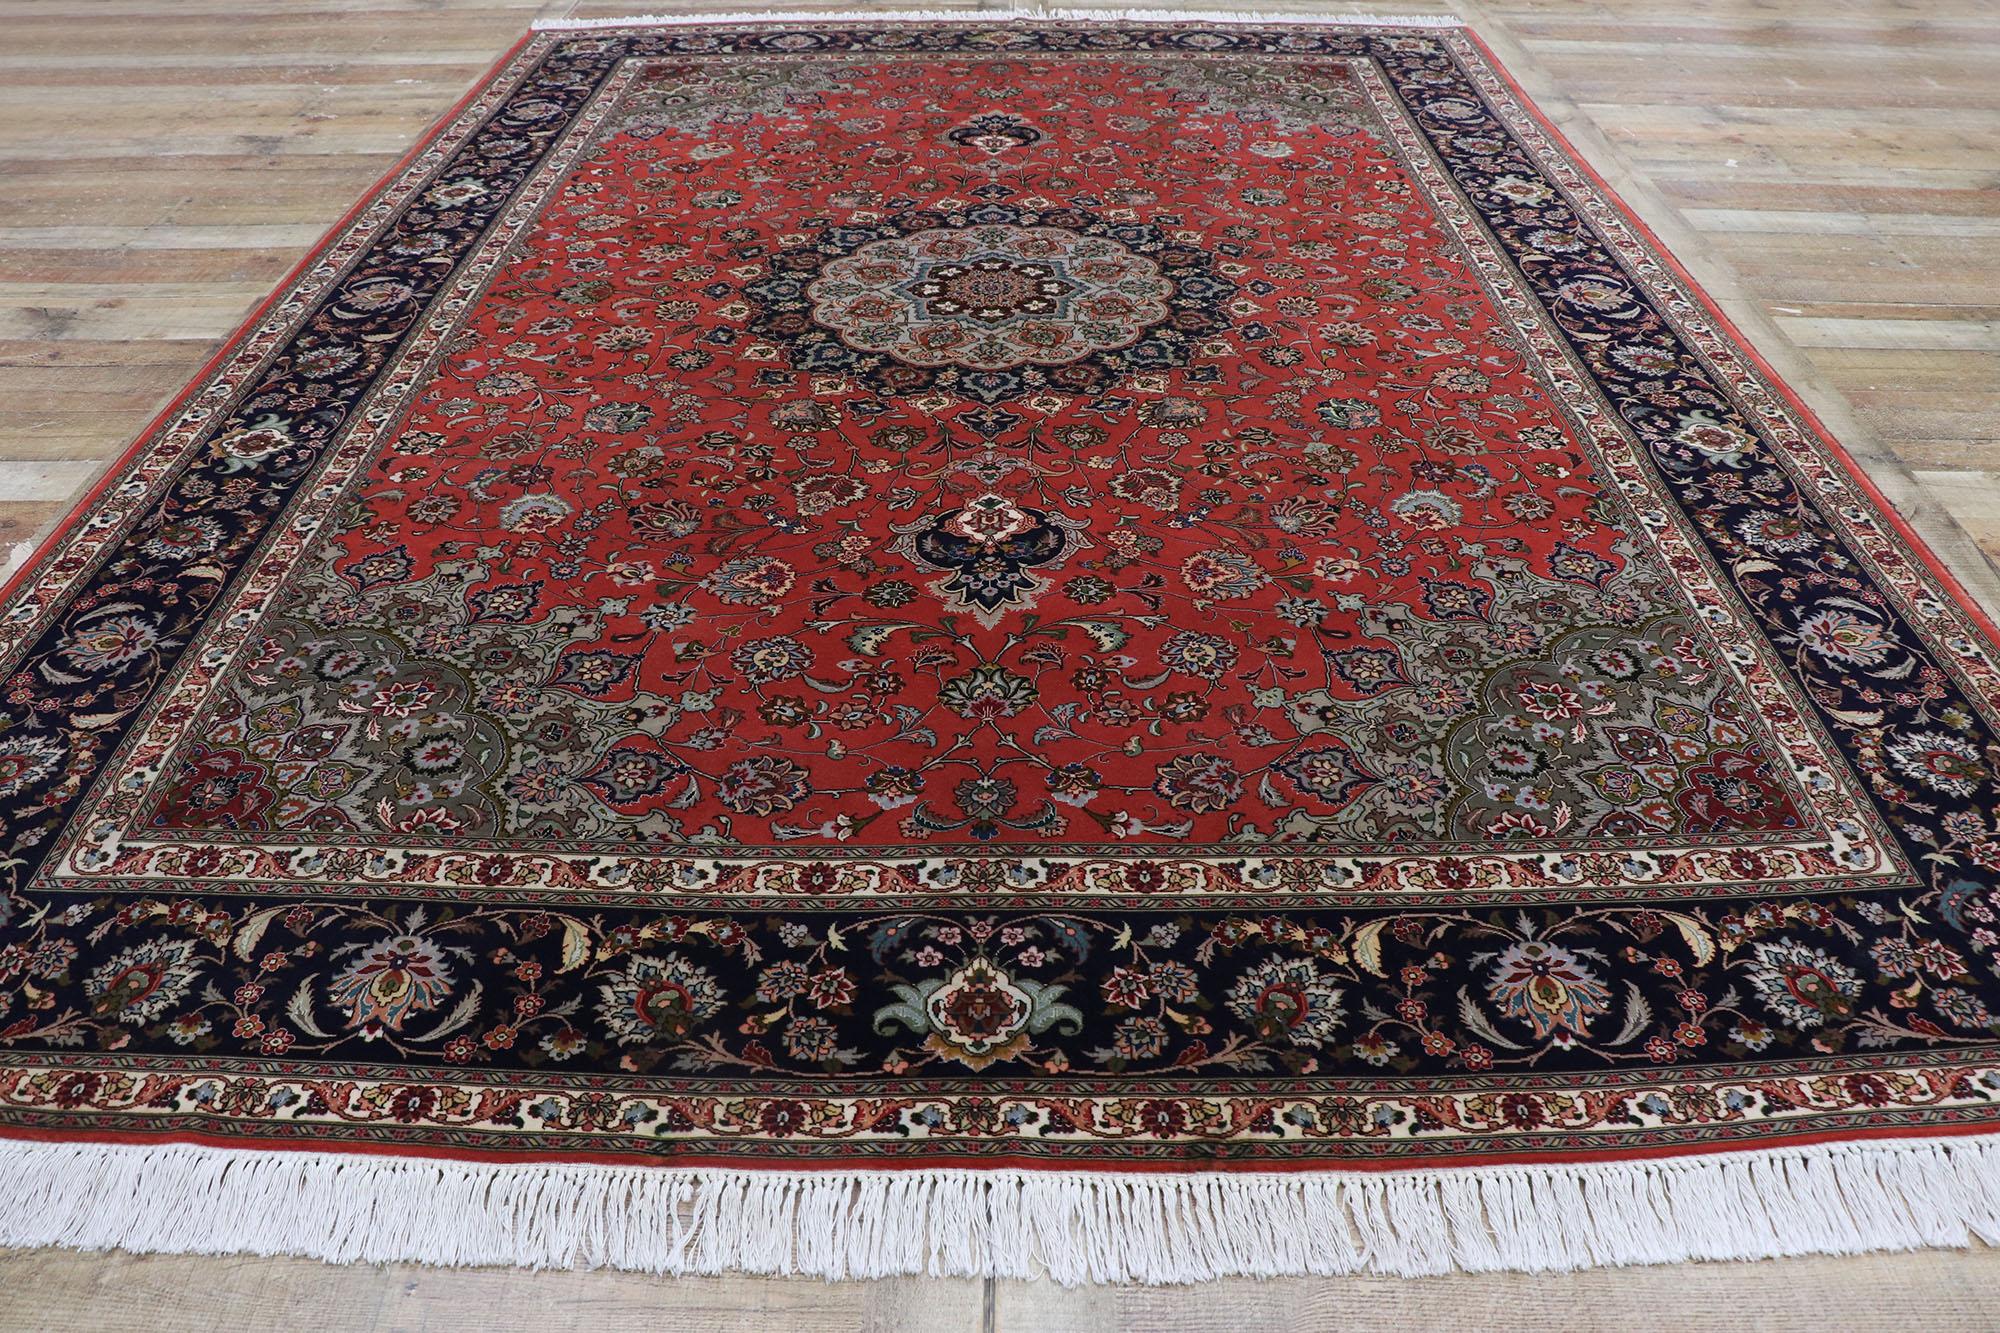 Vintage Persian Tabriz Rug with Victorian English Manor Style In Good Condition For Sale In Dallas, TX